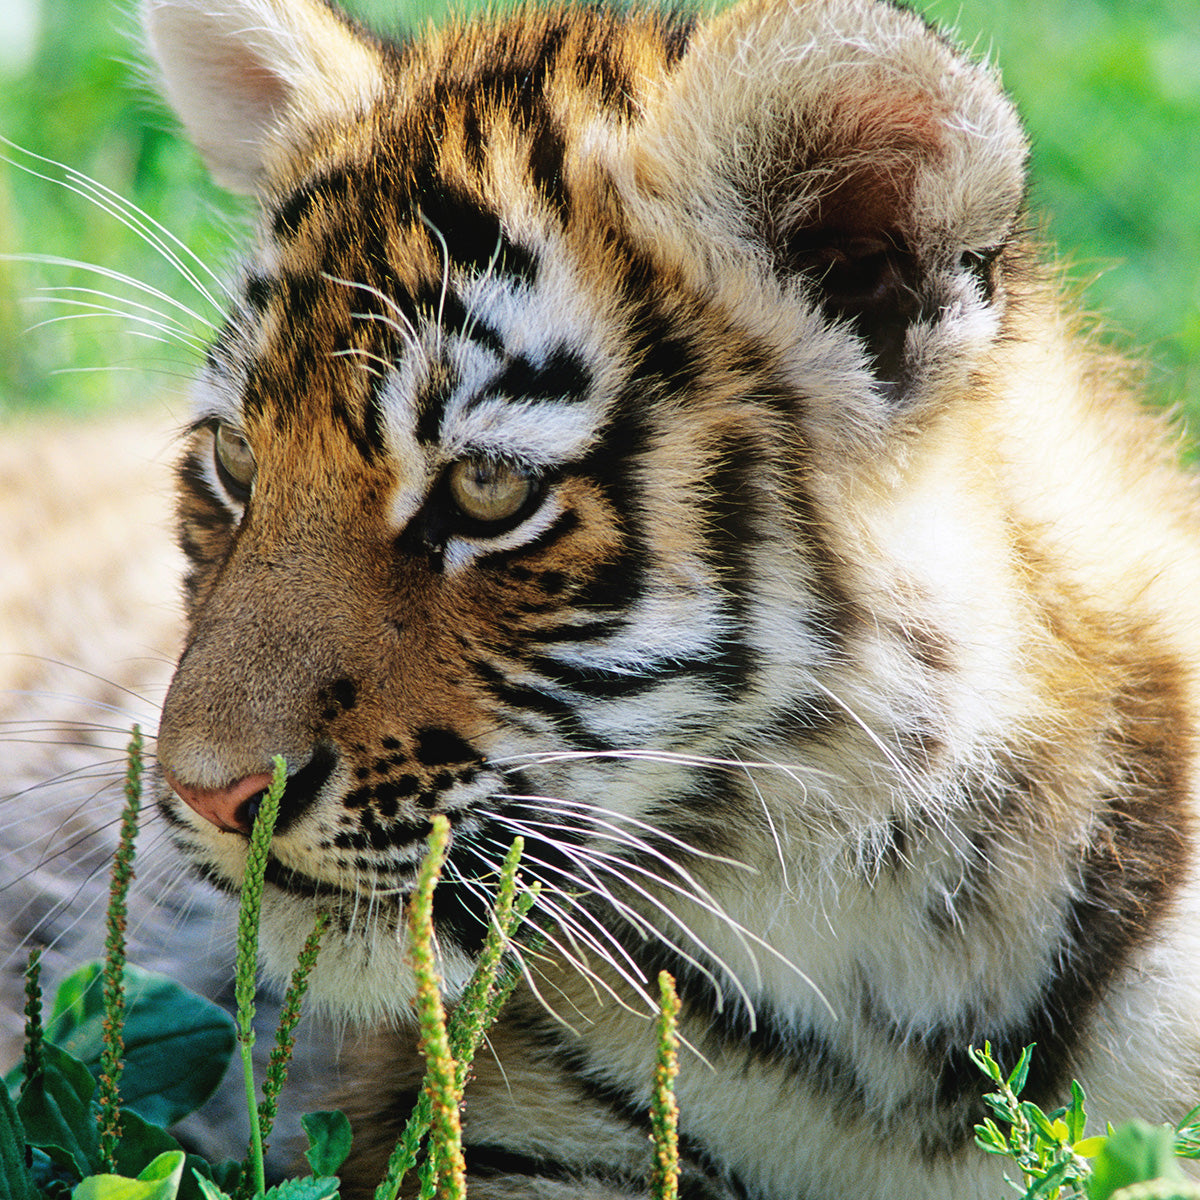 A close up photo of a tiger laying in the grass